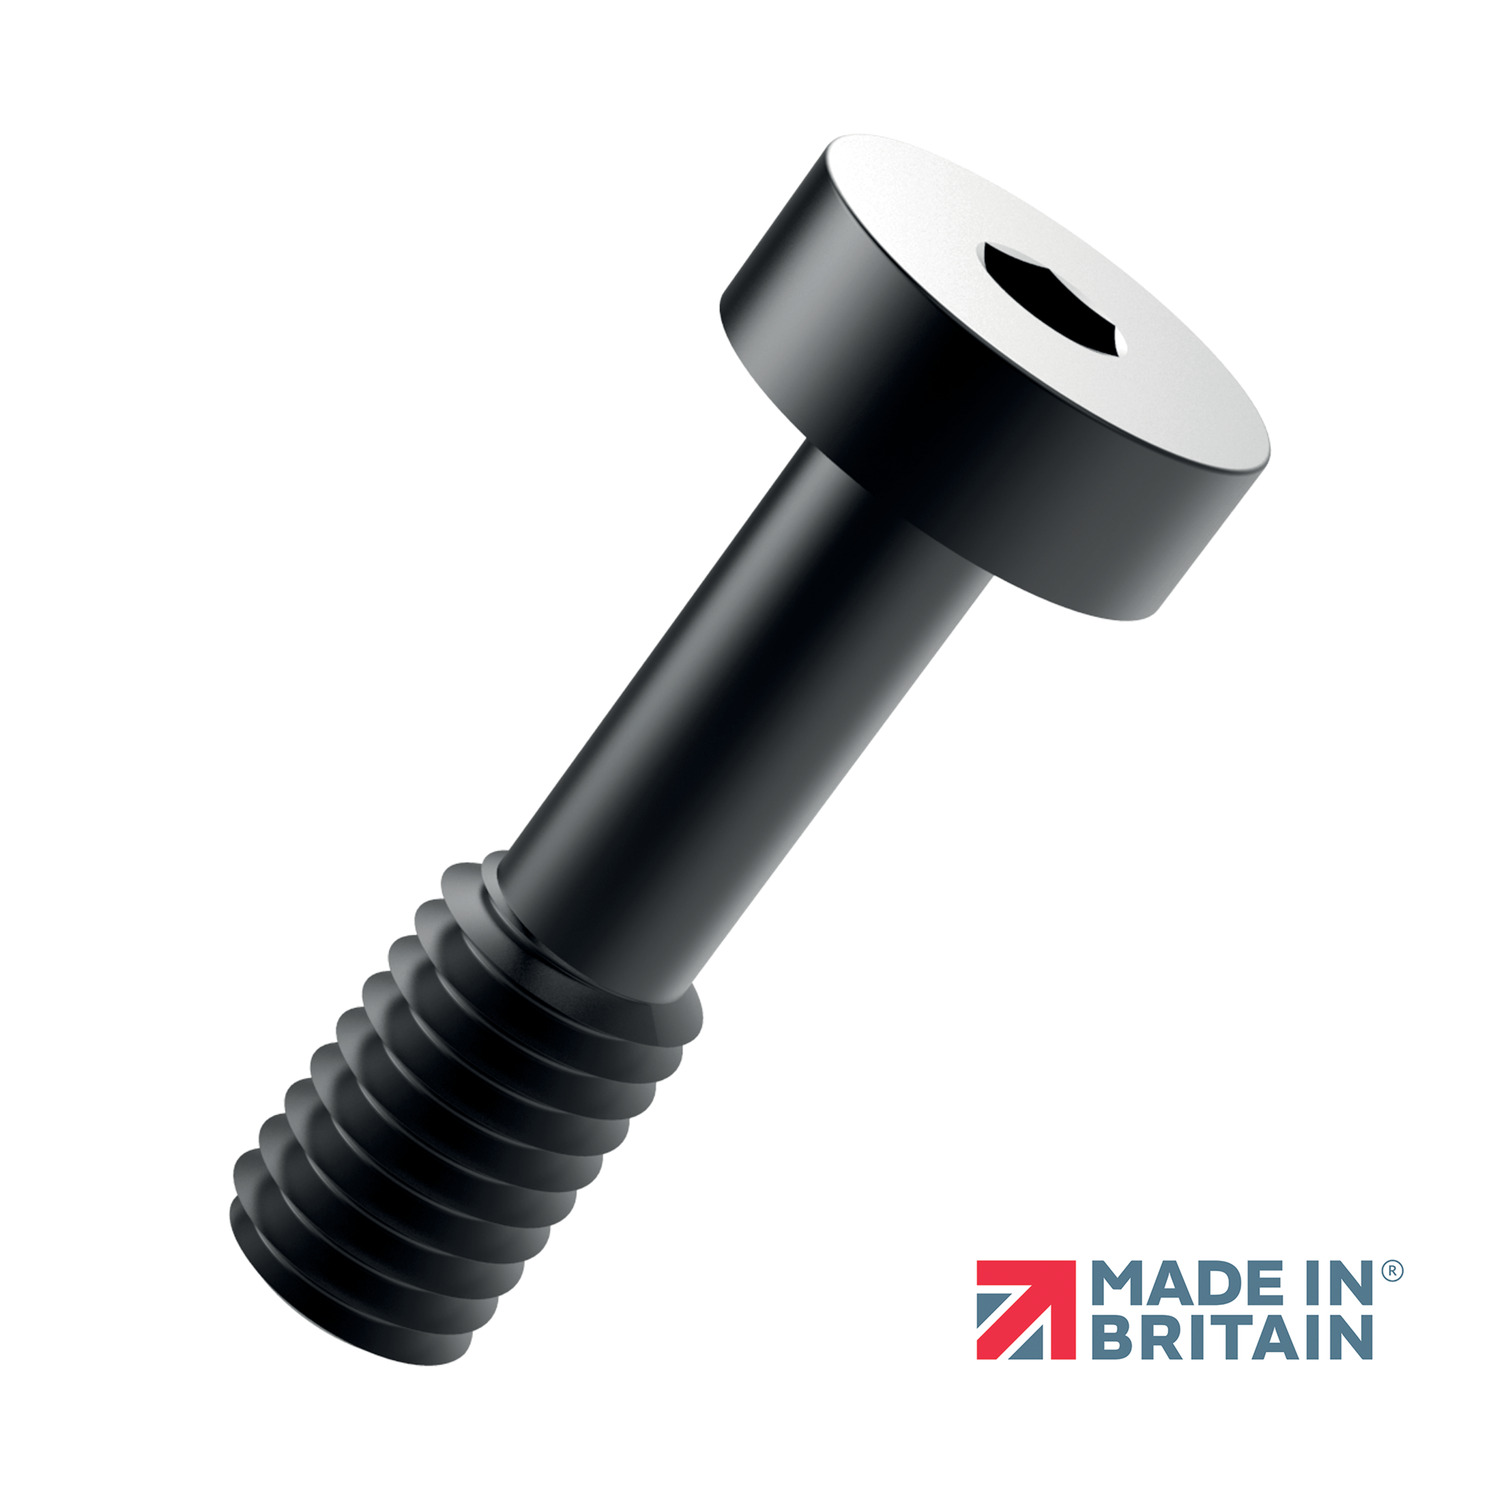 P0152.060-040-B2 Captive screws cheese hex. socket M6x40 stainless 303 series, 1.4305, black oxide coated